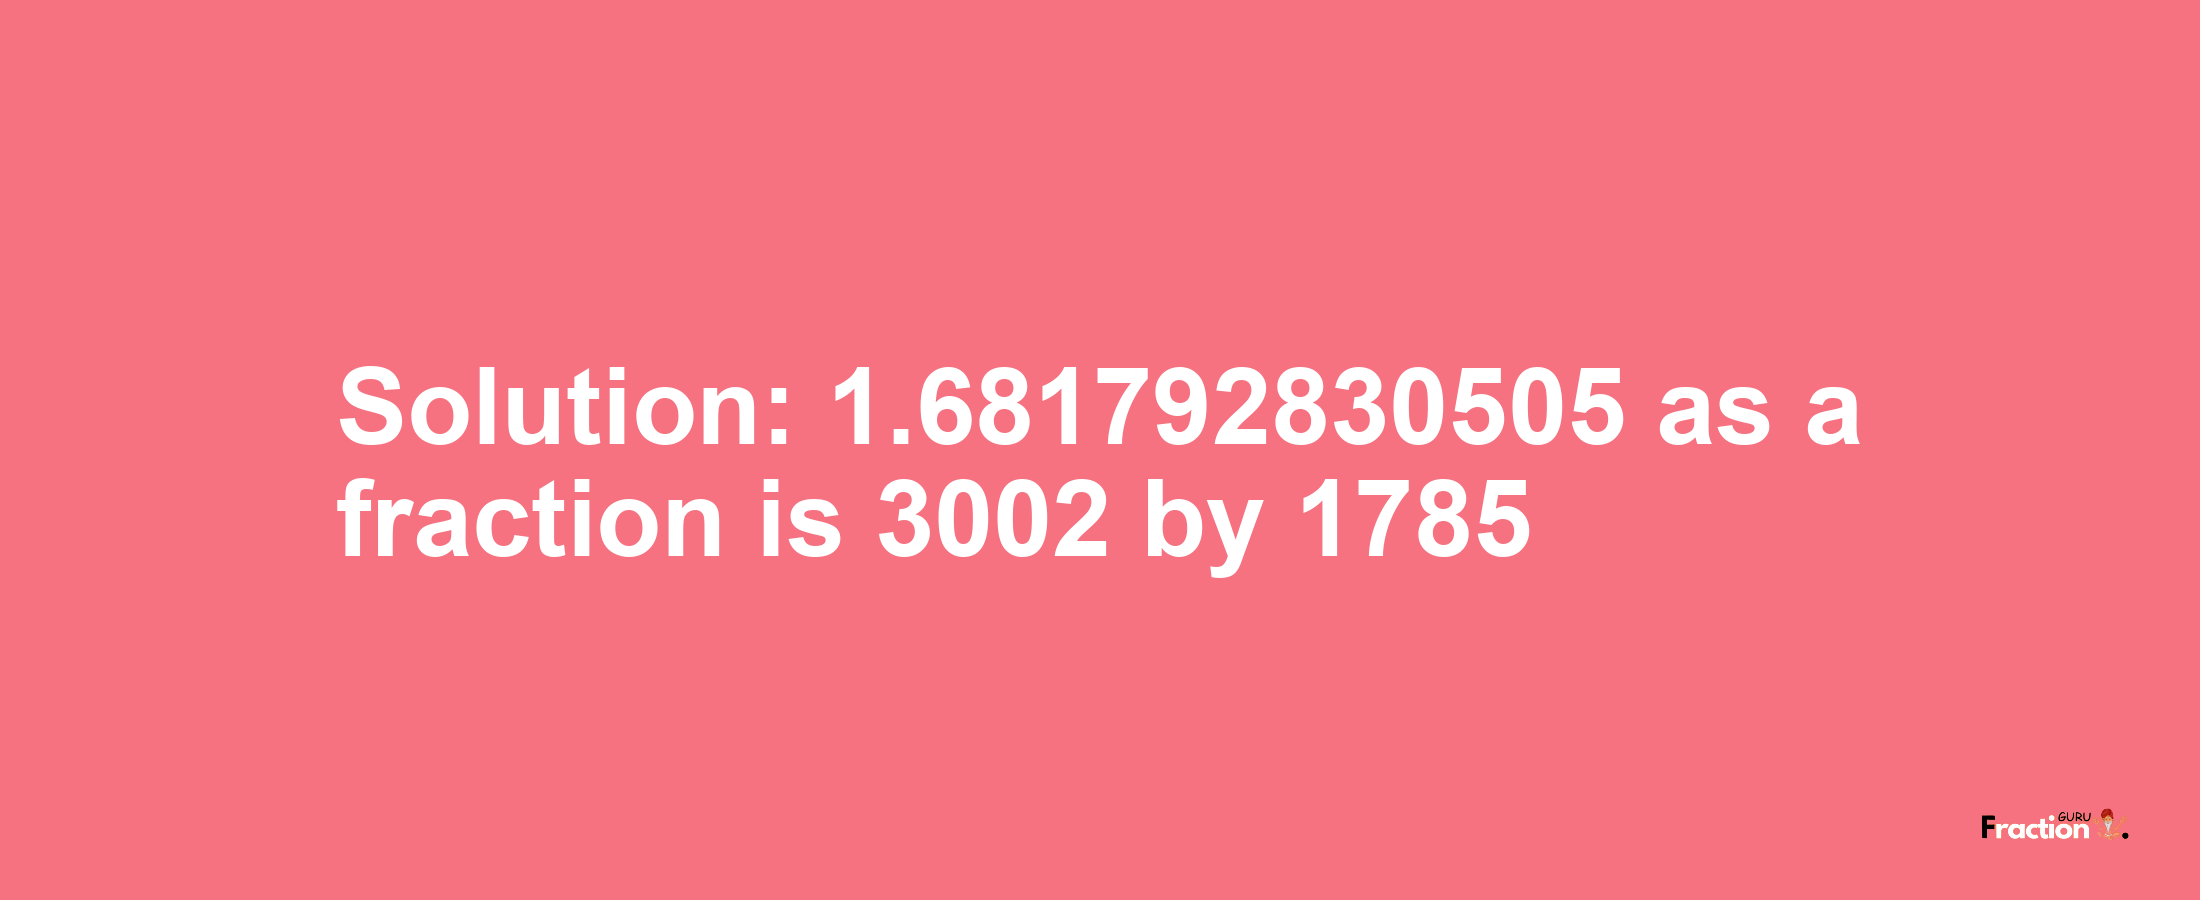 Solution:1.681792830505 as a fraction is 3002/1785